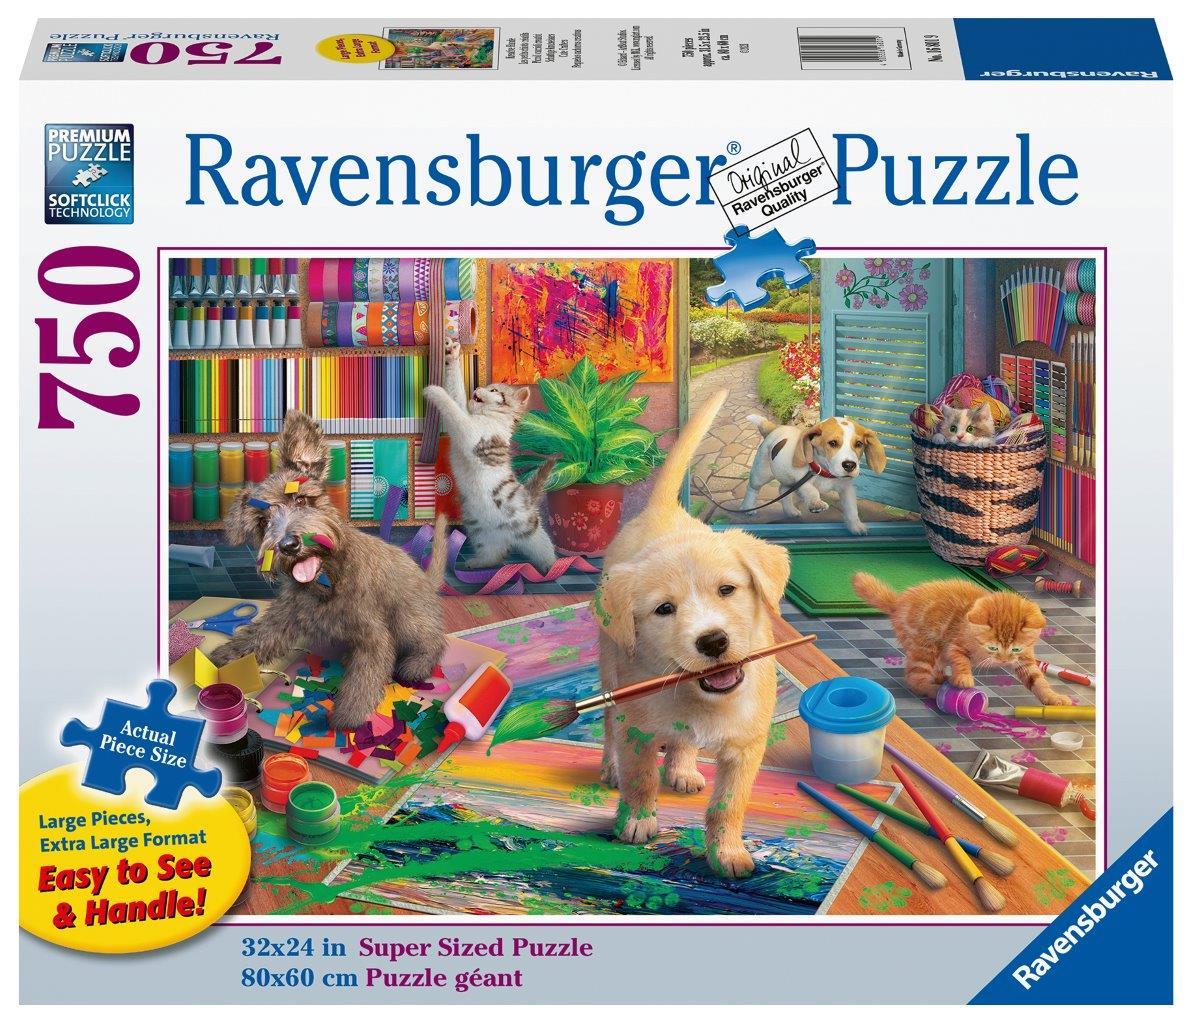 Cute Crafters Puzzle 750pcLF (Ravensburger Puzzle)